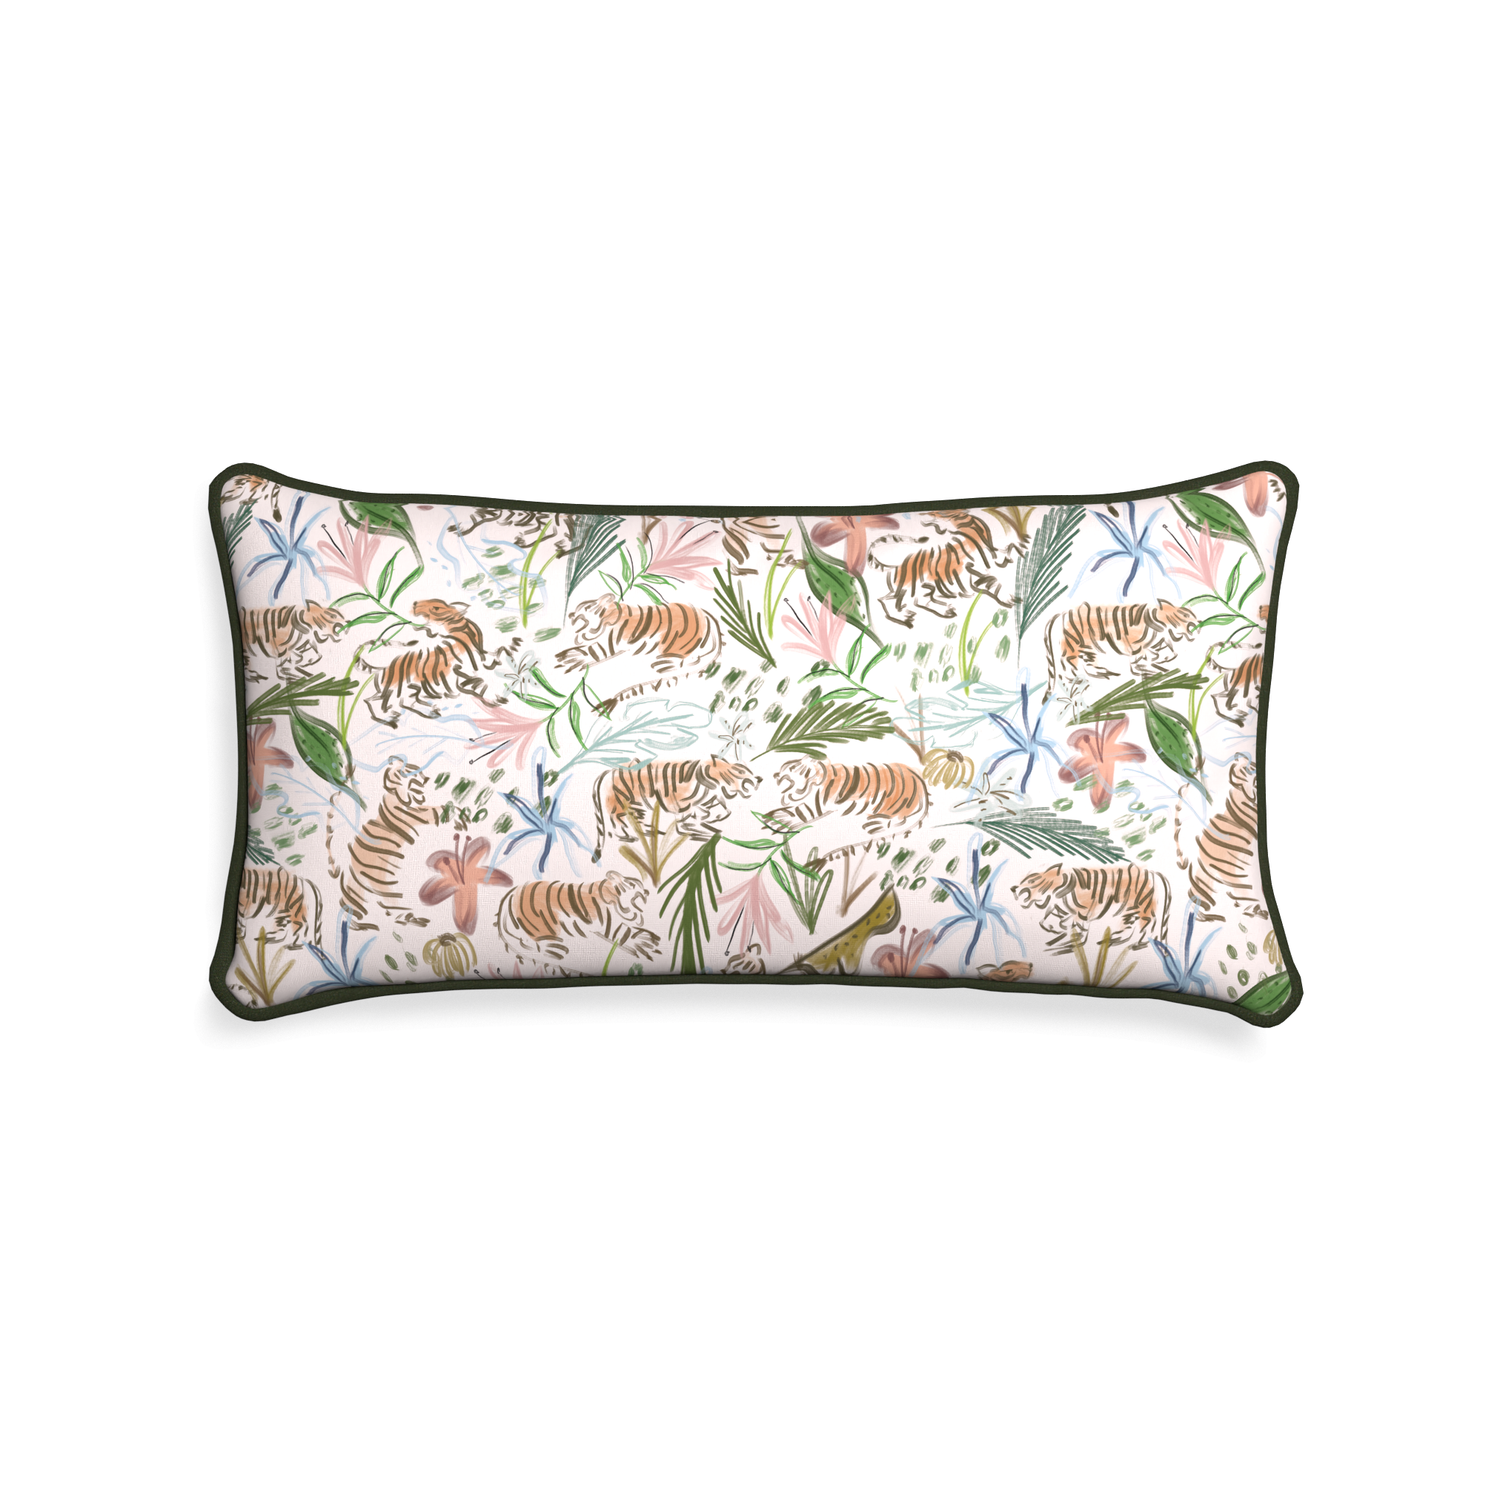 Midi-lumbar frida pink custom pink chinoiserie tigerpillow with f piping on white background